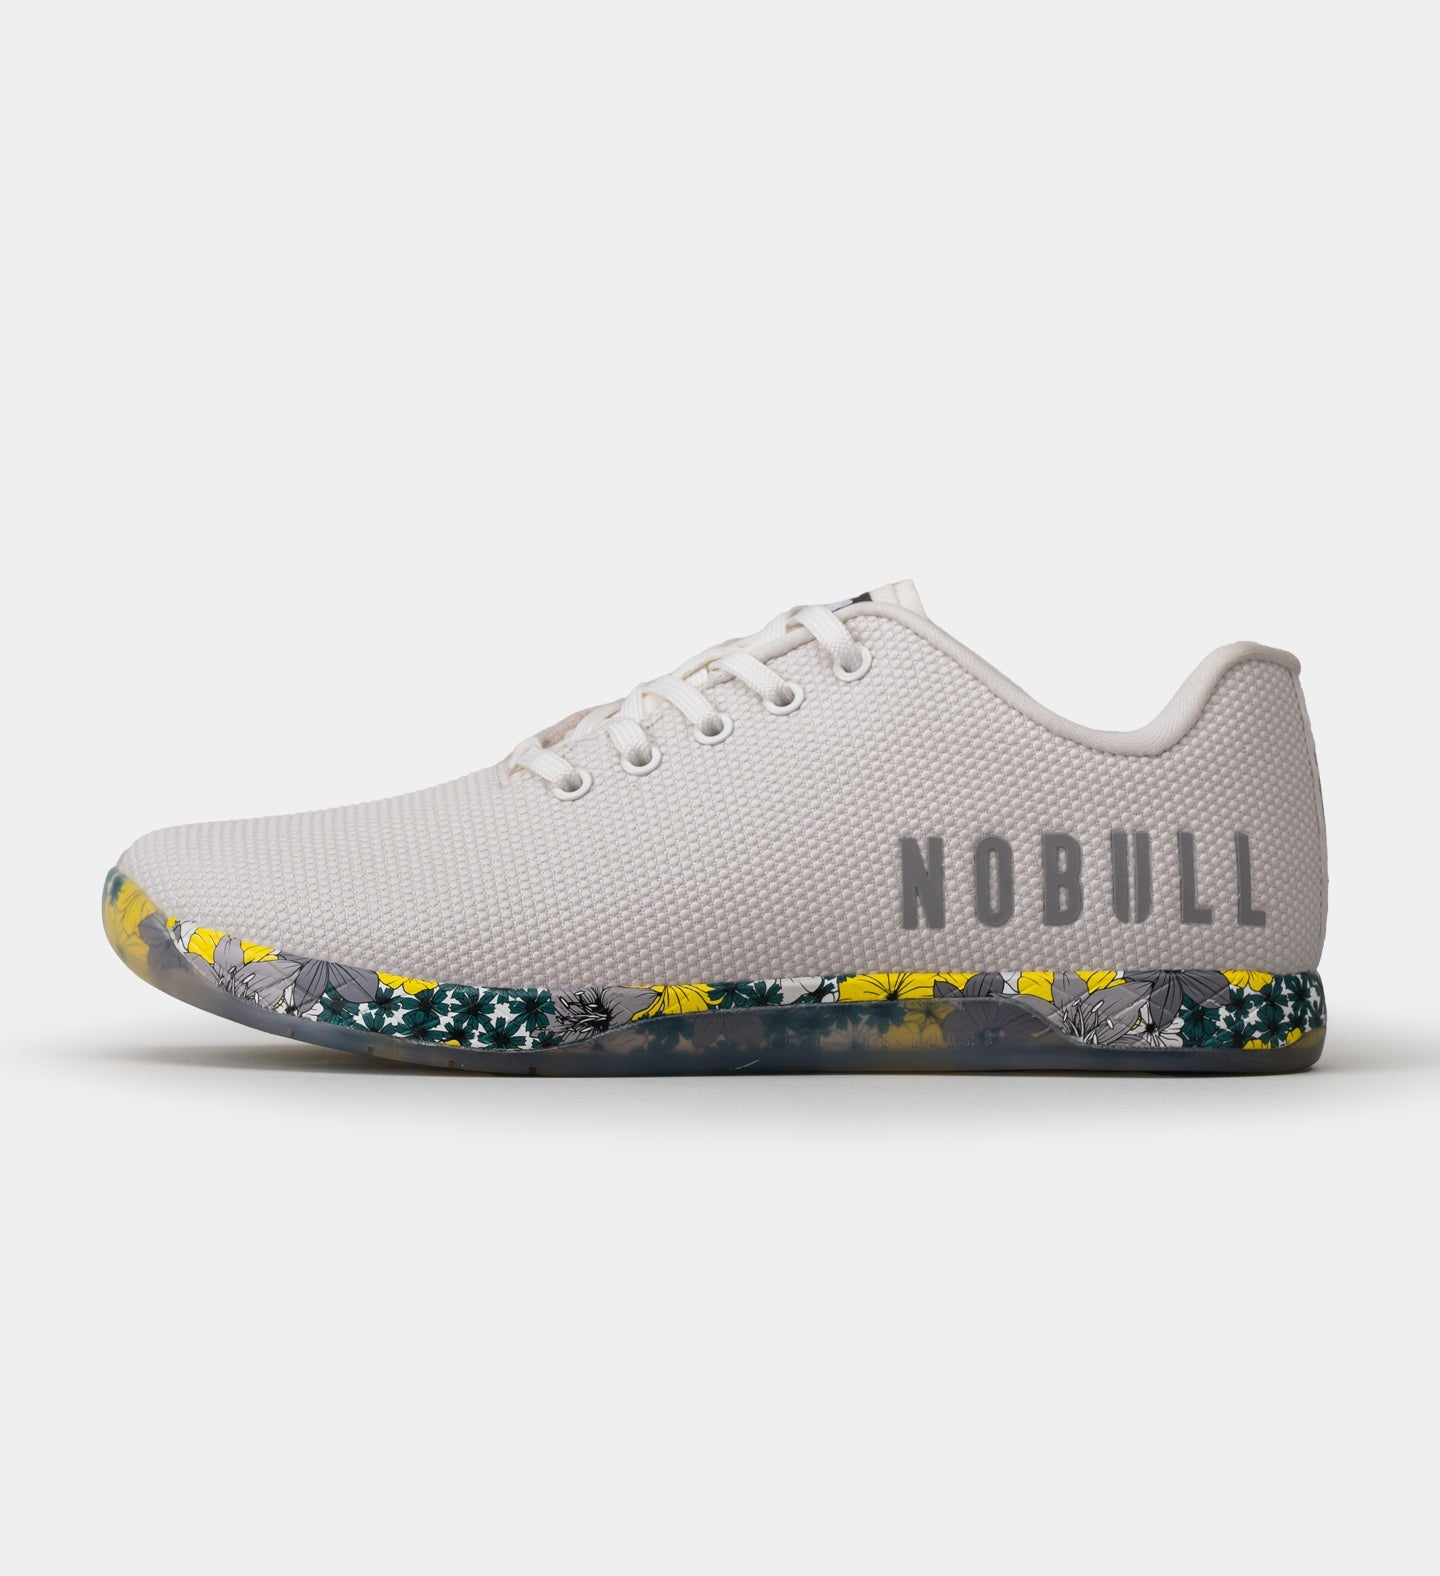 Spring-Ready Floral Accessories : NOBULL